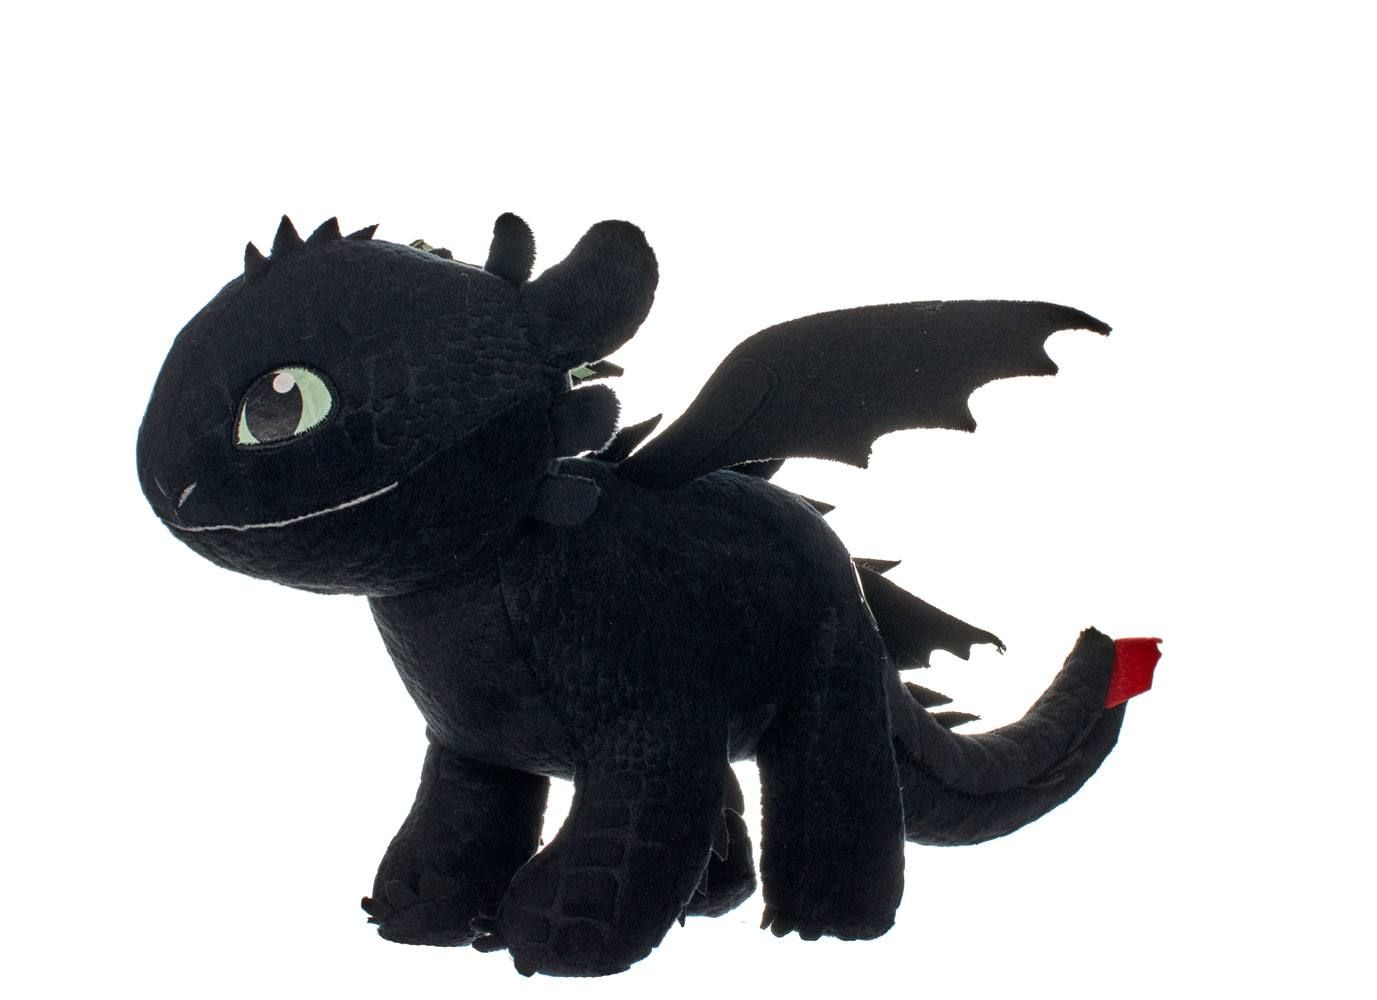 How to Train Your Dragon 3 Plush Figure Toothless Glow In The Dark 32 cm Joy Toy (IT)